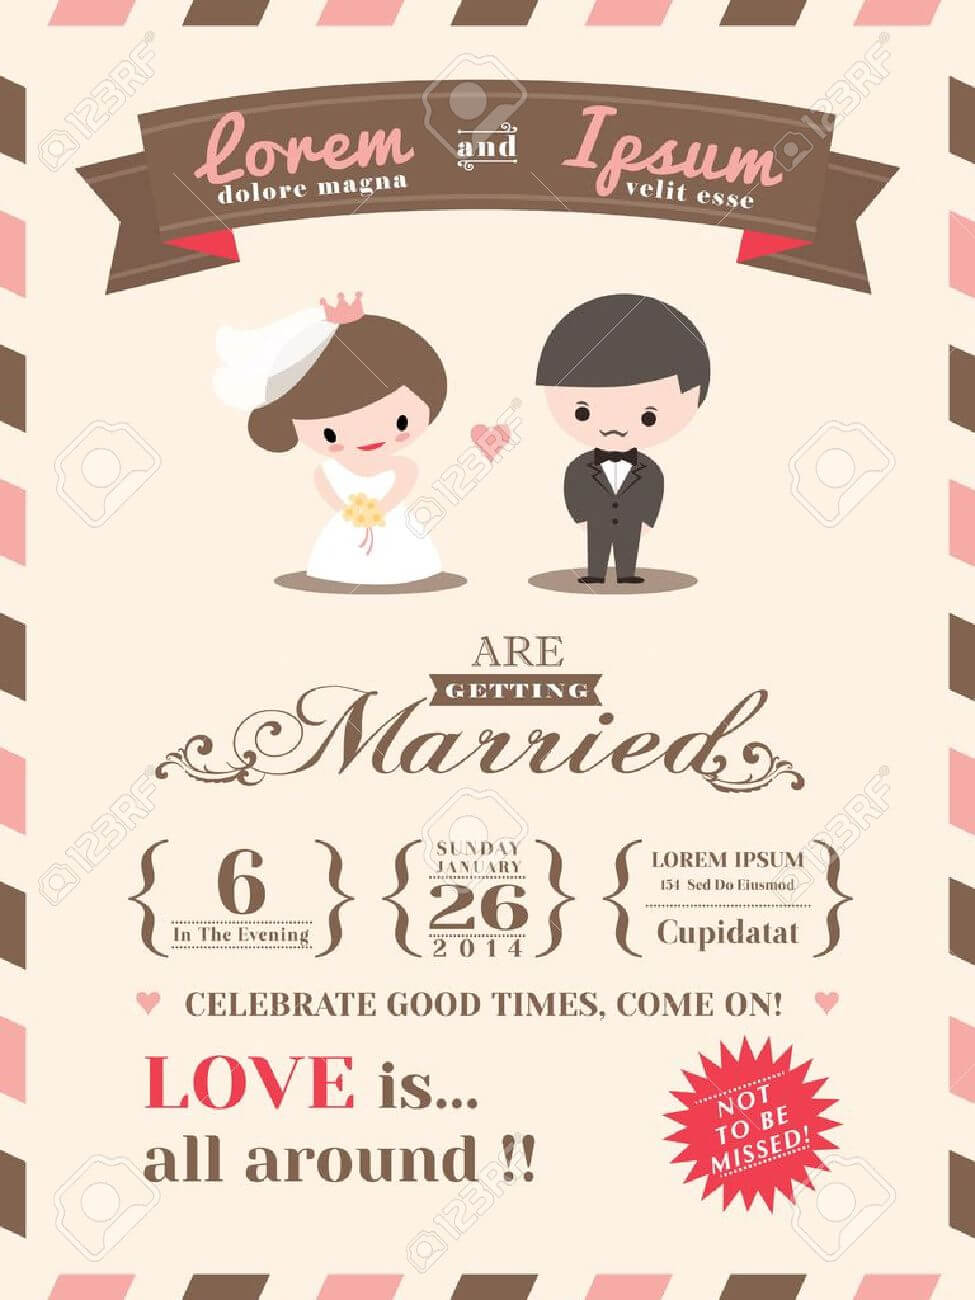 Wedding Invitation Card Template With Cute Groom And Bride Cartoon Pertaining To Invitation Cards Templates For Marriage